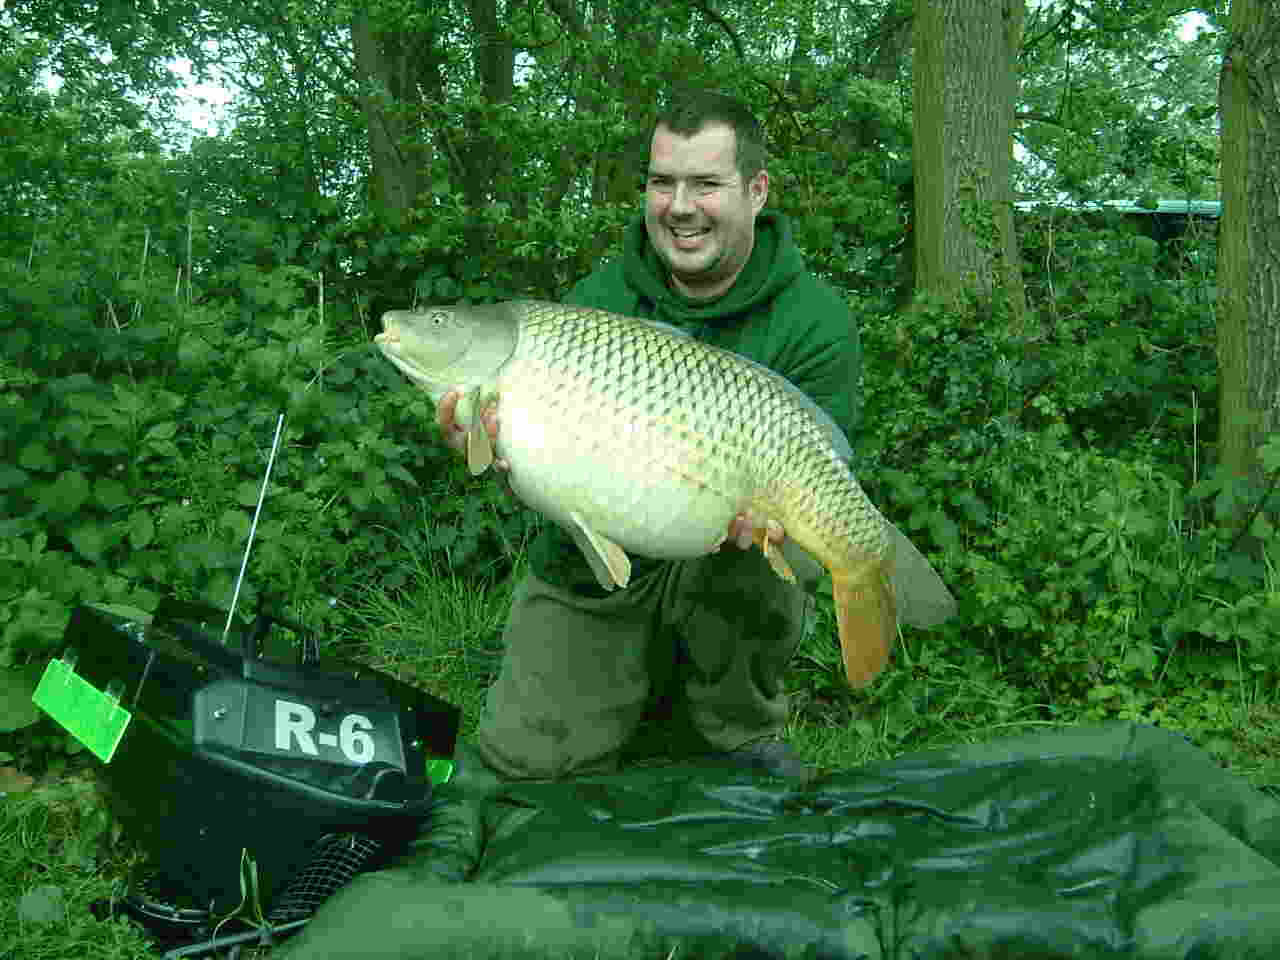 Me with a 35lb+ Common